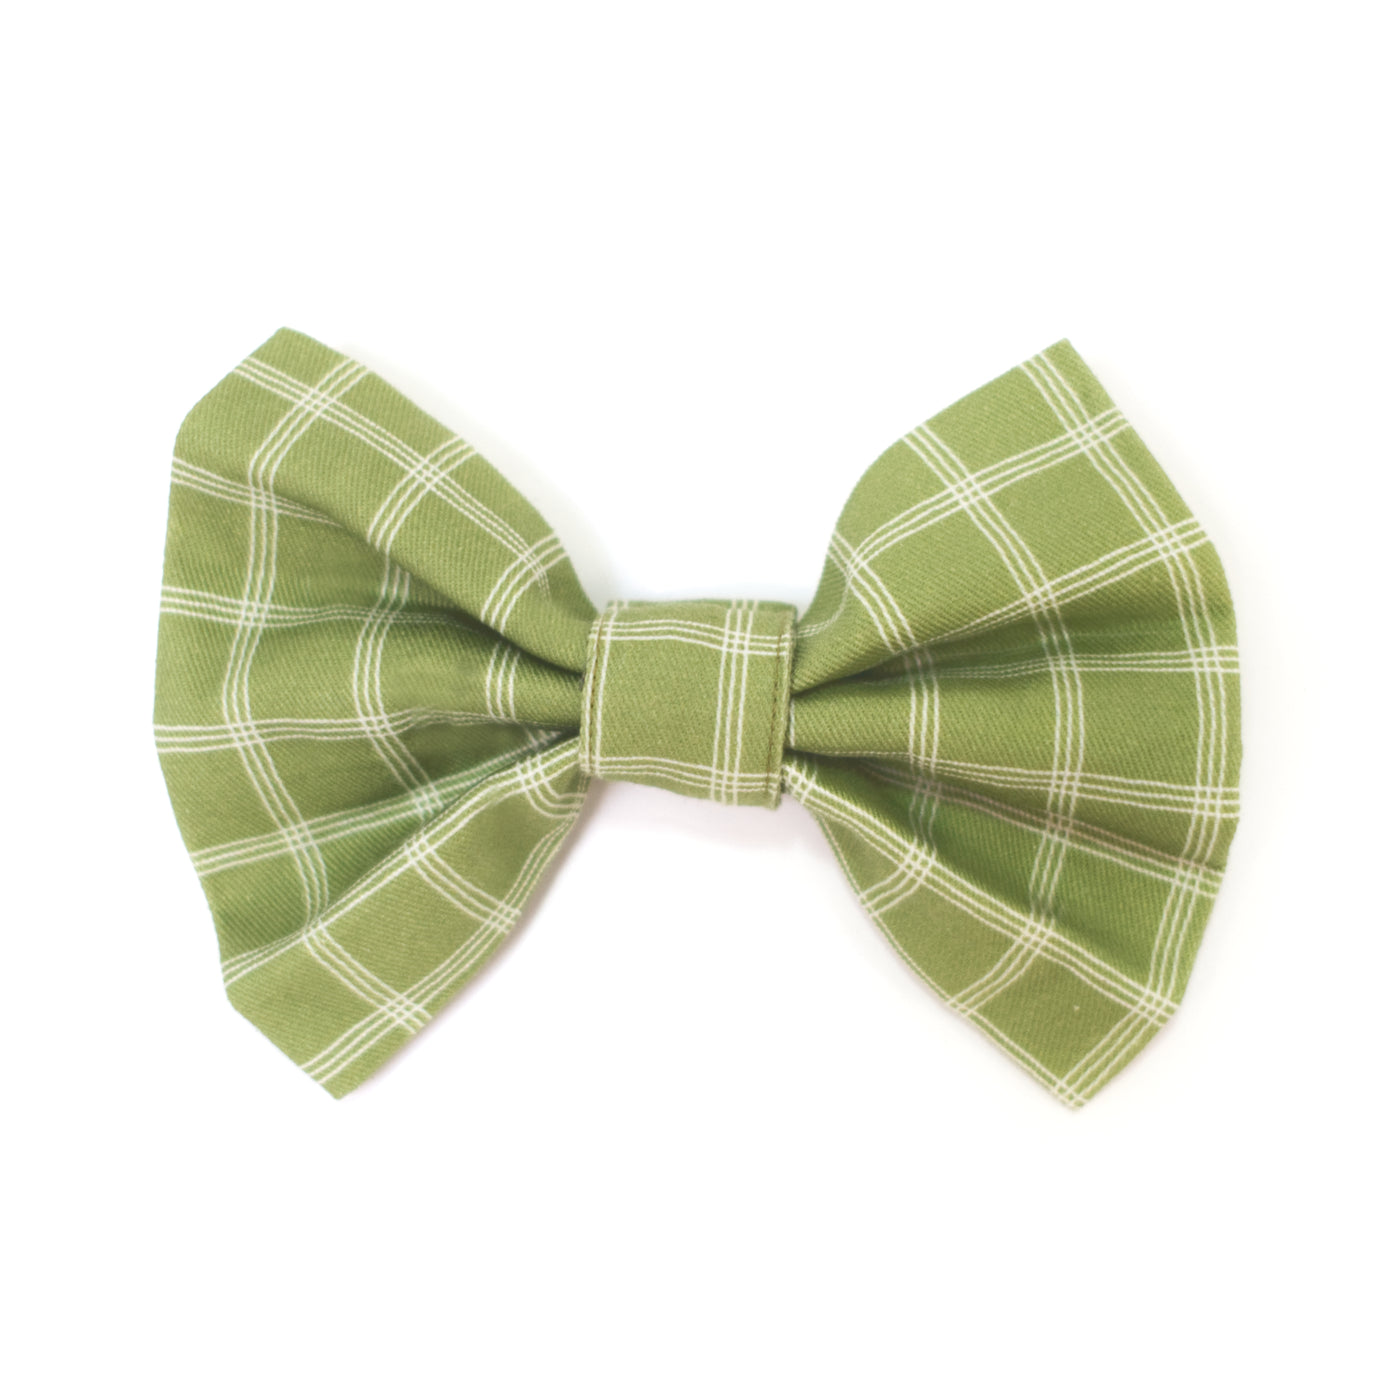 Dog bow tie in moss green plaid that can be worn on collar or harness